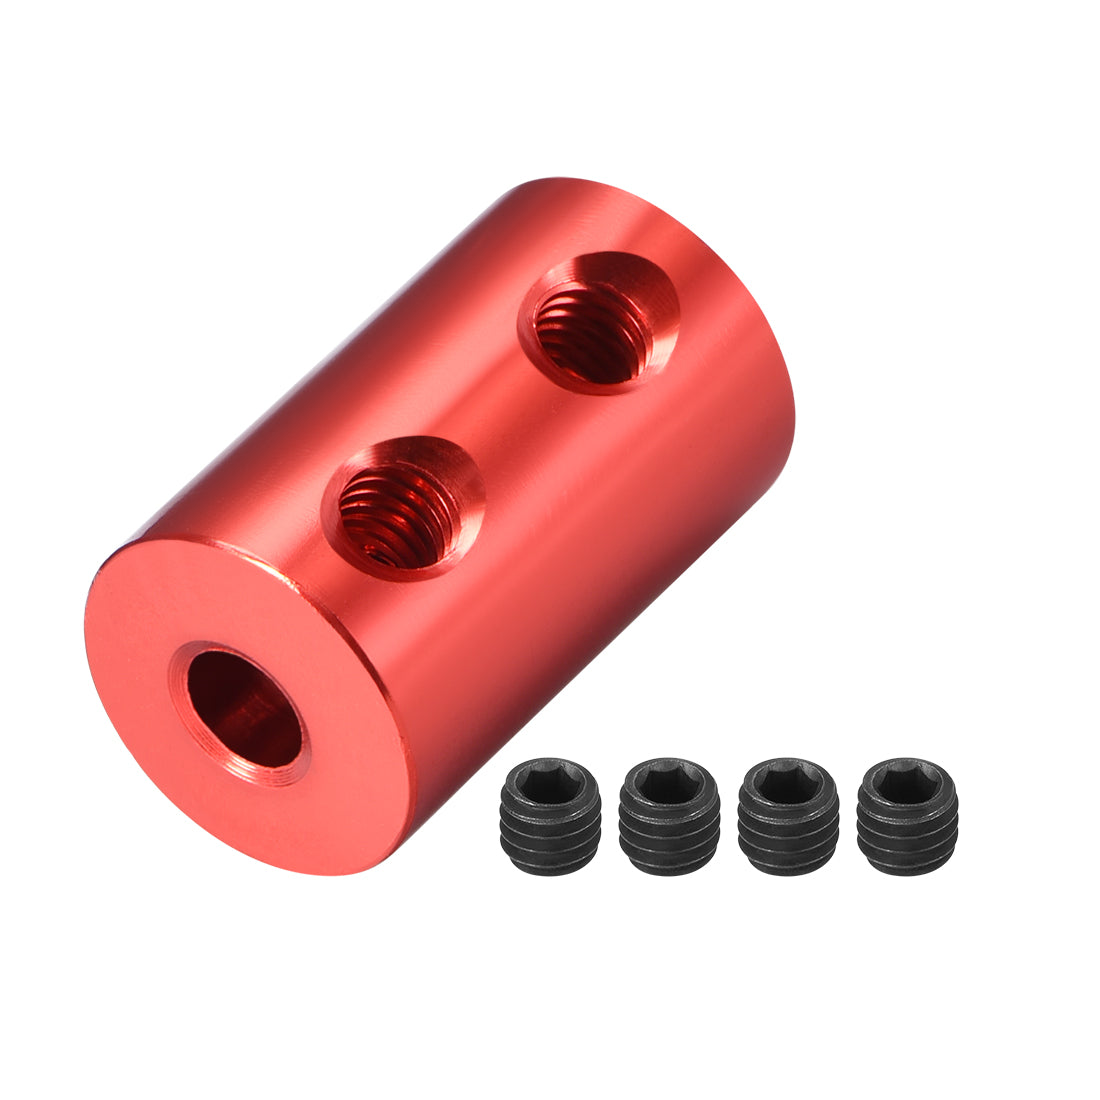 uxcell Uxcell Shaft Coupling 3mm to 4mm Bore L20xD12 Robot Motor Wheel Rigid Coupler Red